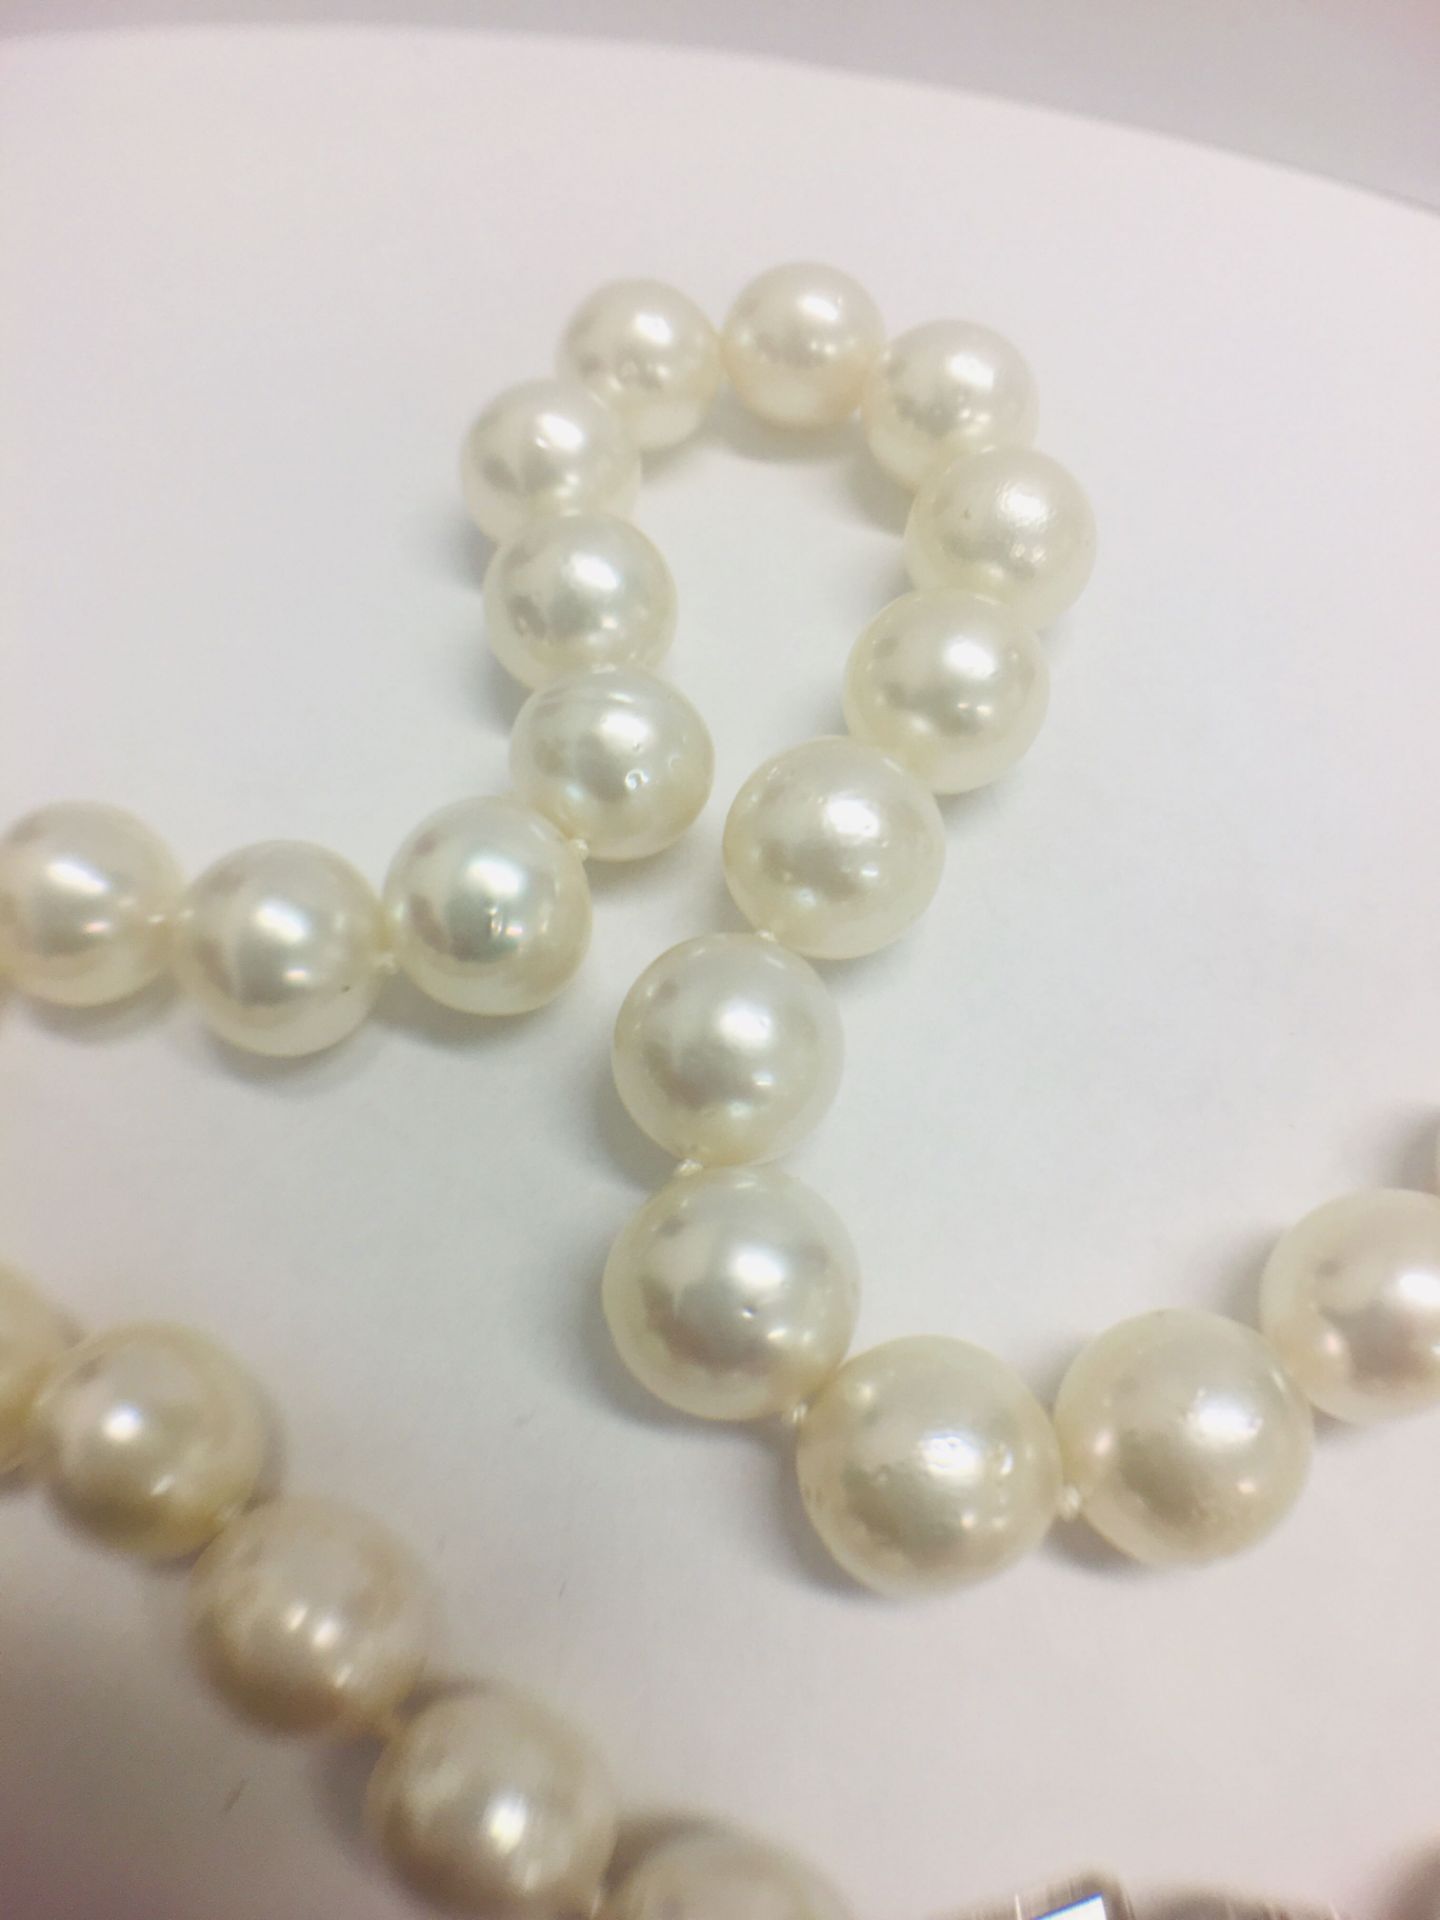 Strand 35 South Sea Pearls with 14ct White Gold Filagree Style Ball - Image 6 of 9